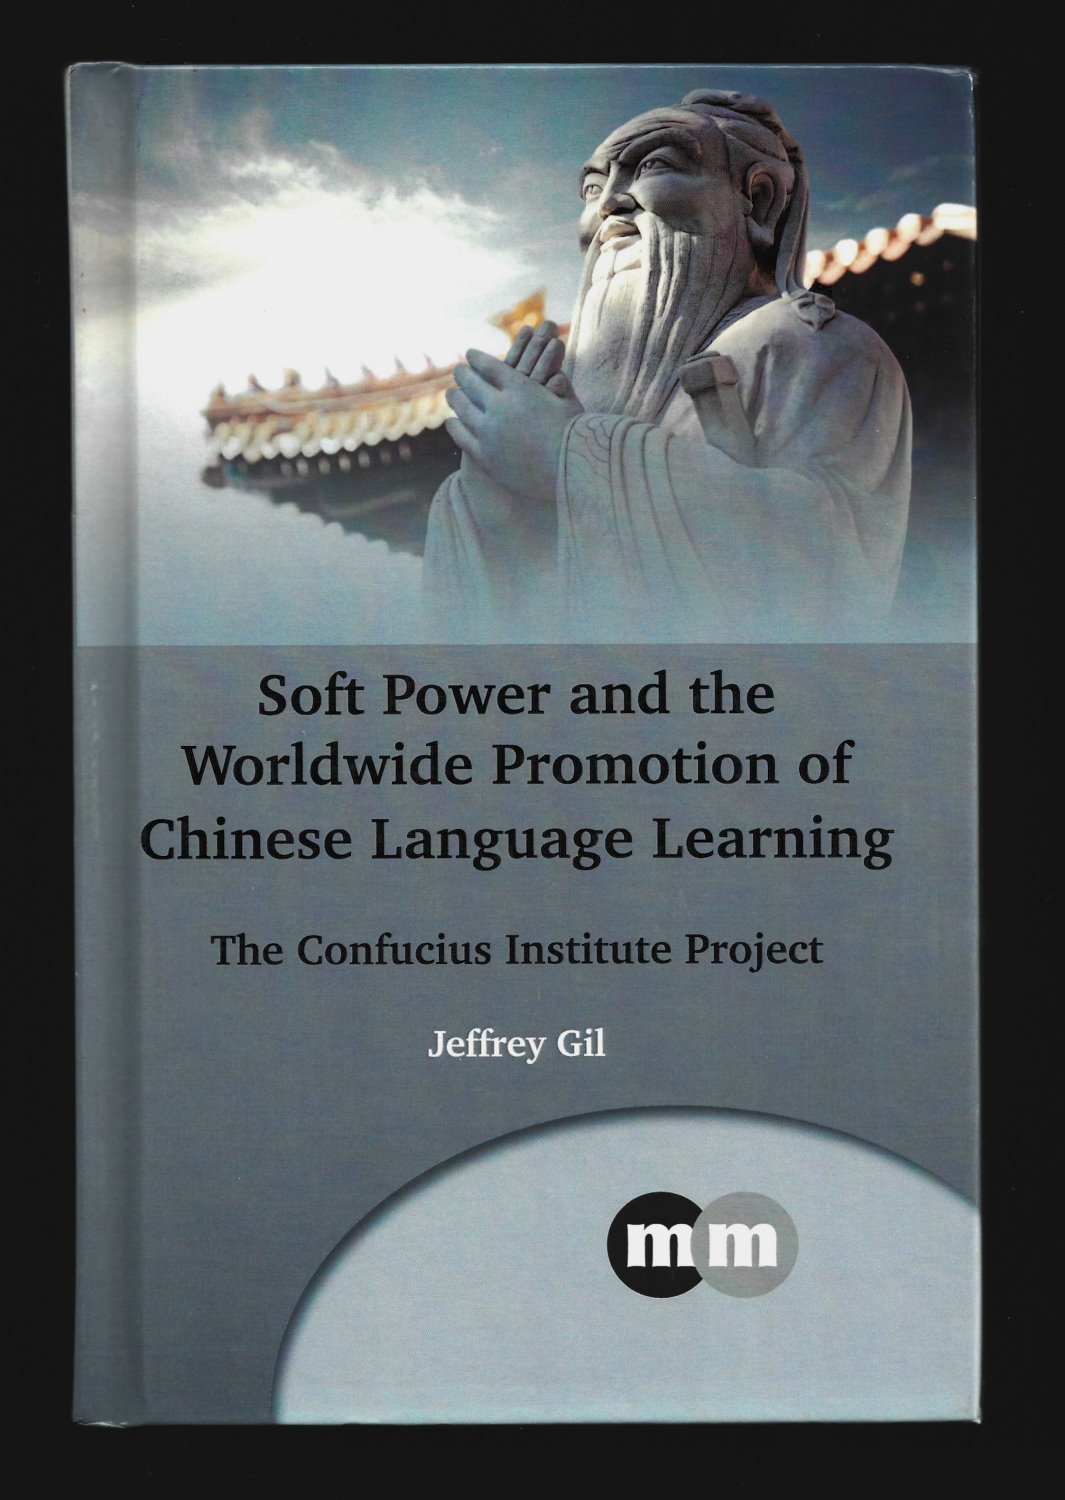 Soft Power and the Worldwide Promotion of Chinese Language Learning: The Confucius Institute Project (Multilingual Matters) - Jeffrey Gil